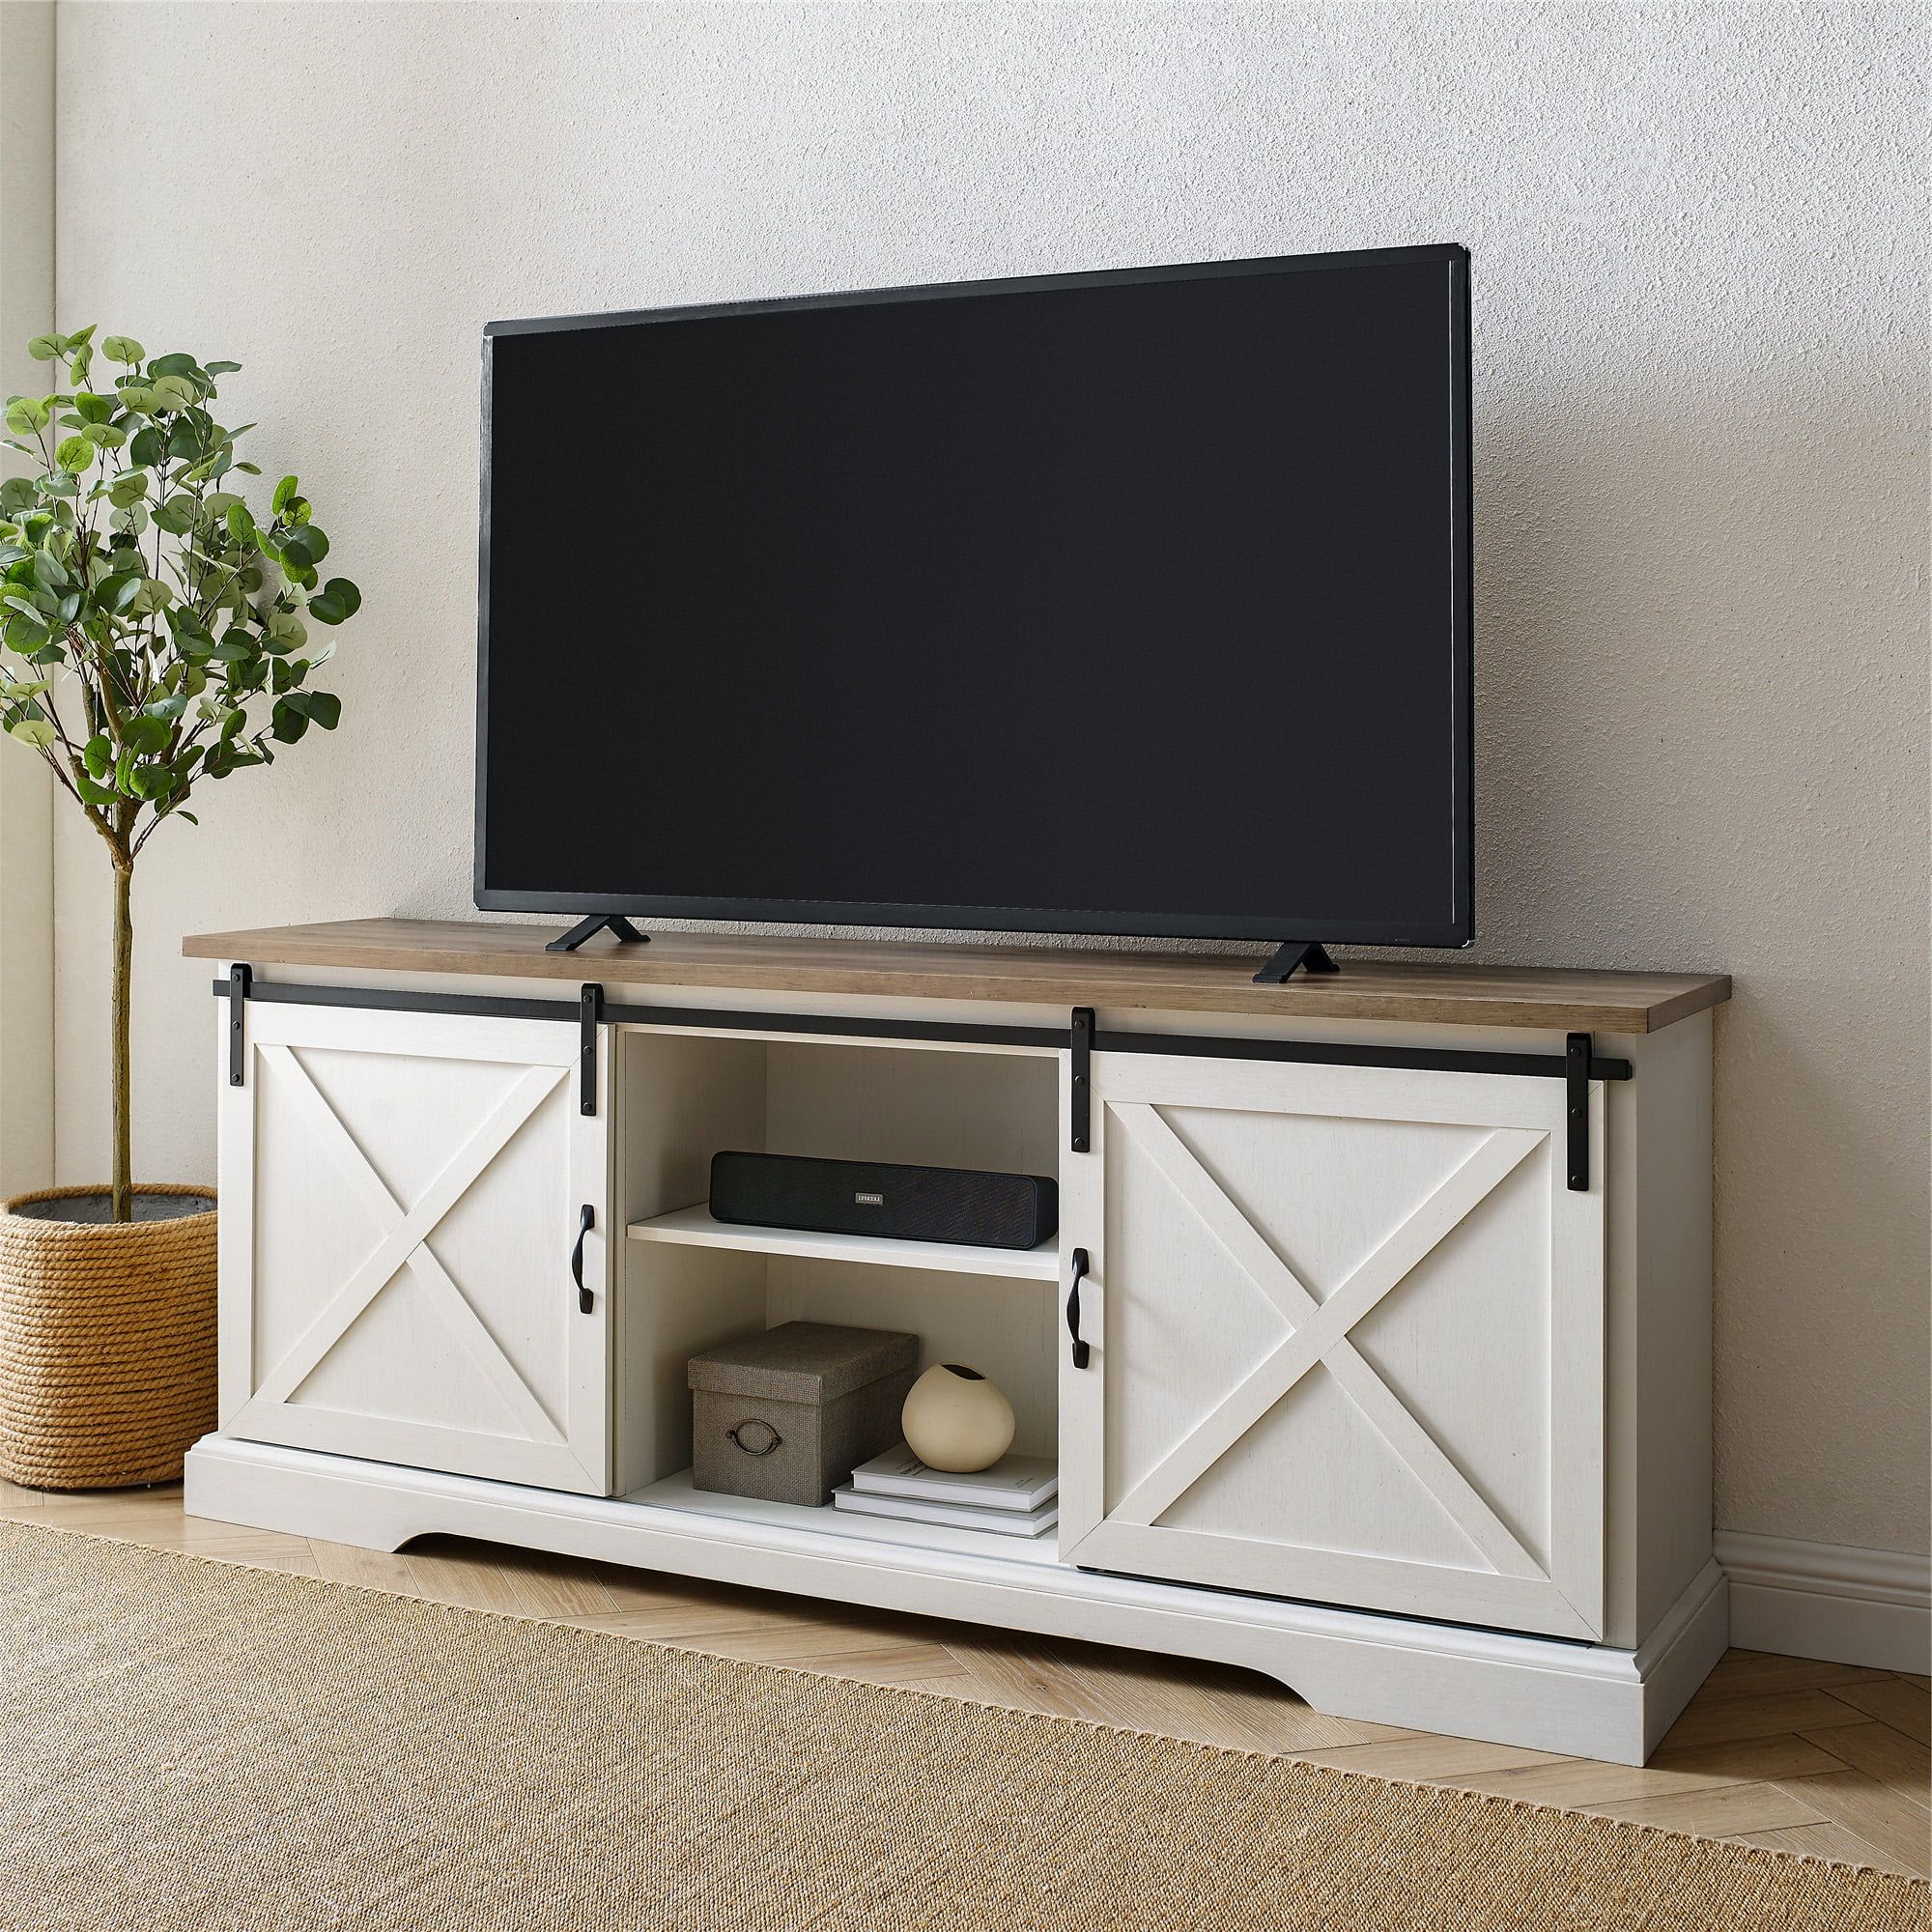 Widely Used White Tv Stands Entertainment Center With Manor Park Sliding Door Tv Stand For Tvs Up To 80", White/barnwood (View 9 of 15)